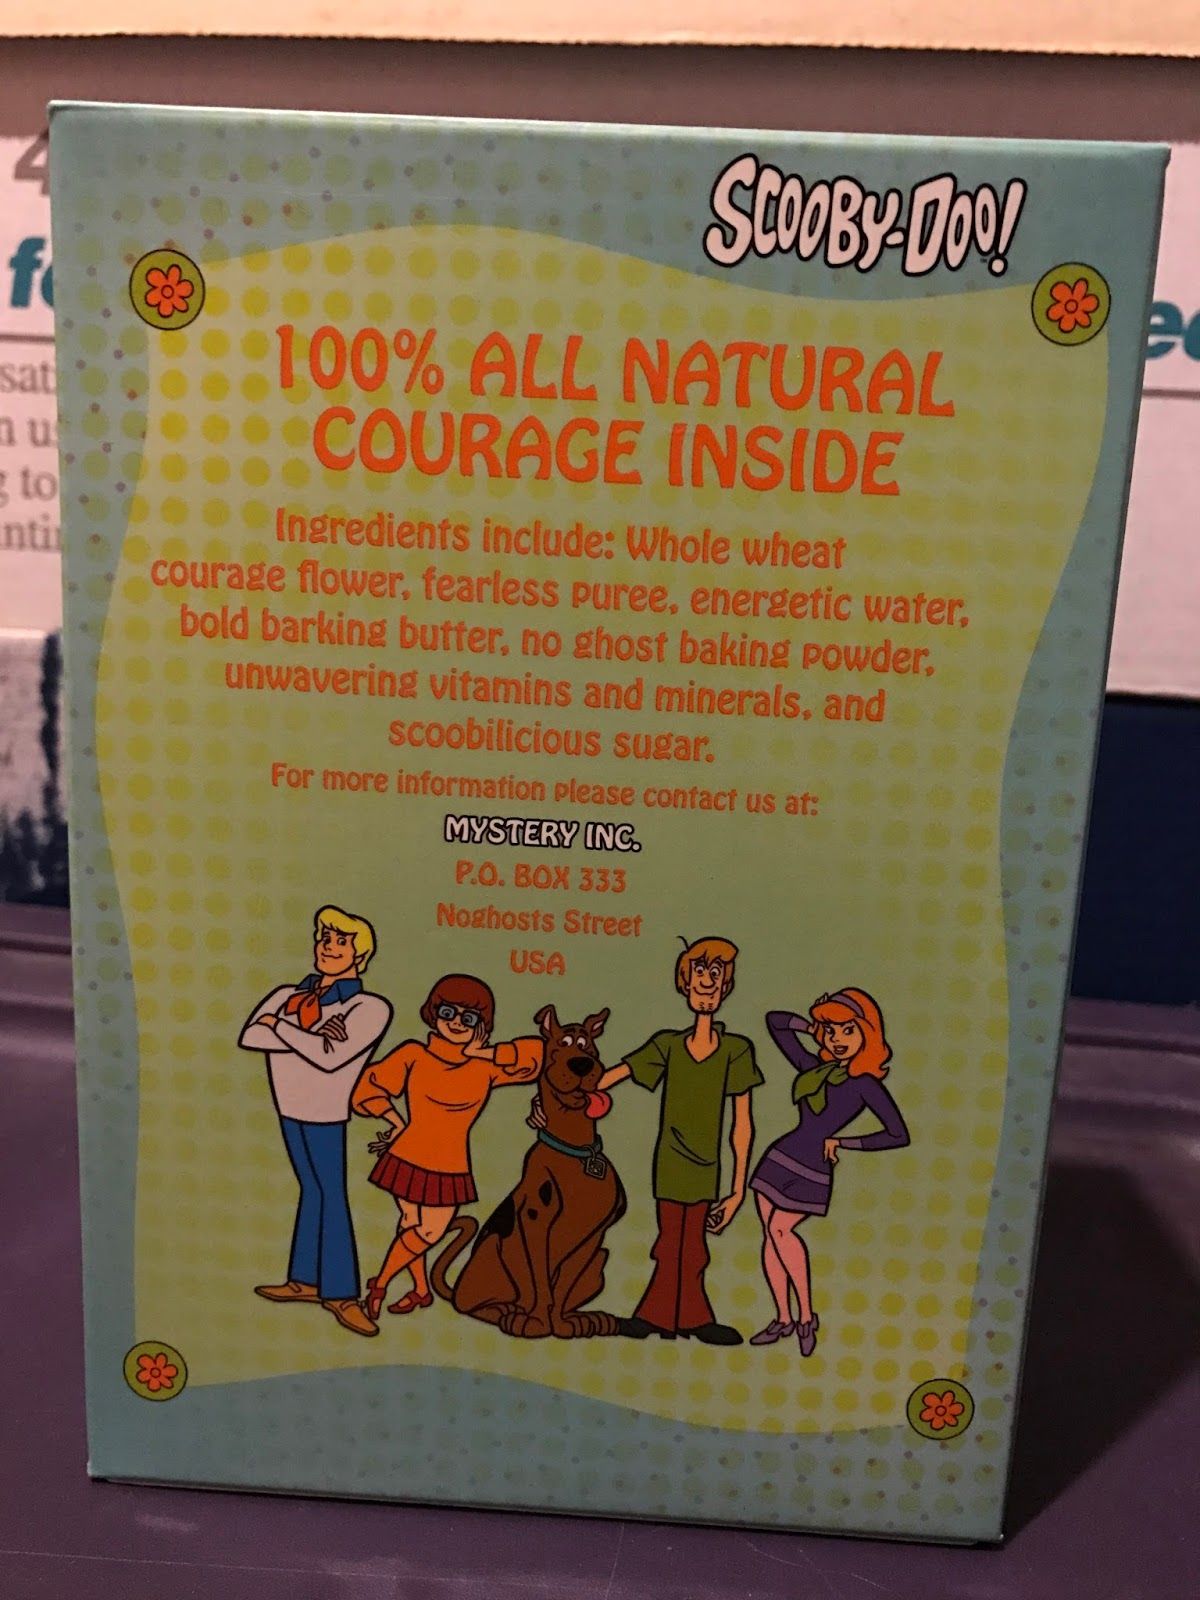 ScoobyAddict's Blog: My Scooby Stuff - Day 24 - Scooby Snacks...Or Is It?